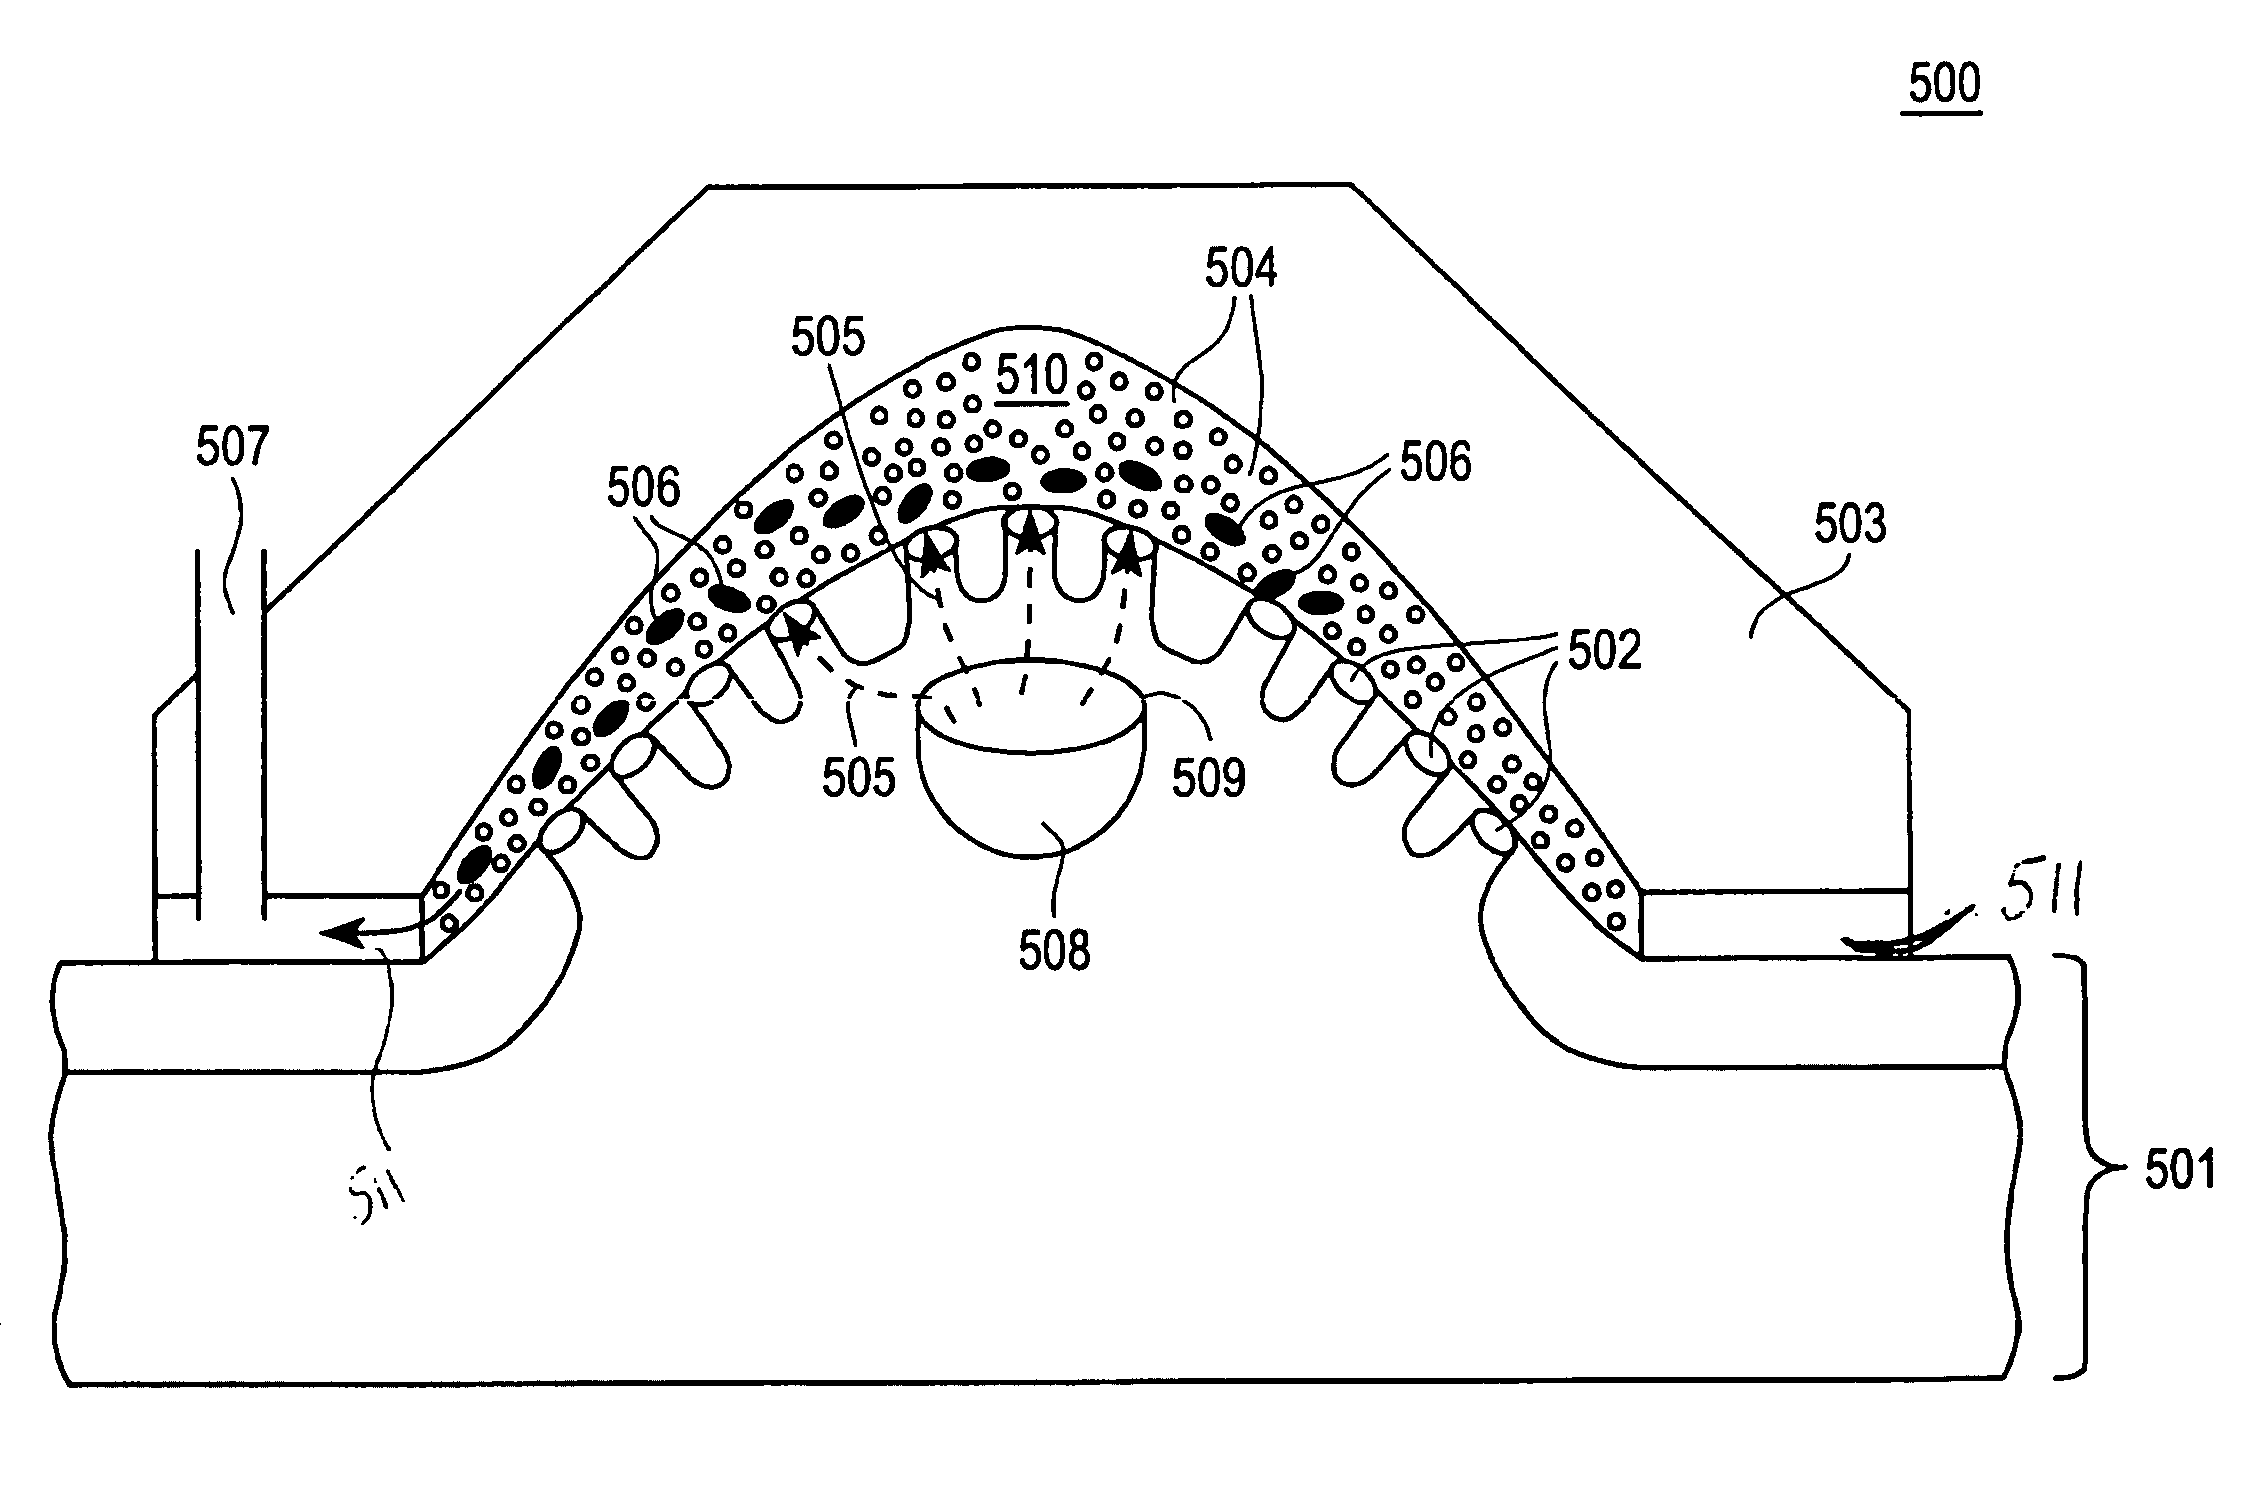 Apparatus and method to apply substances to tissue